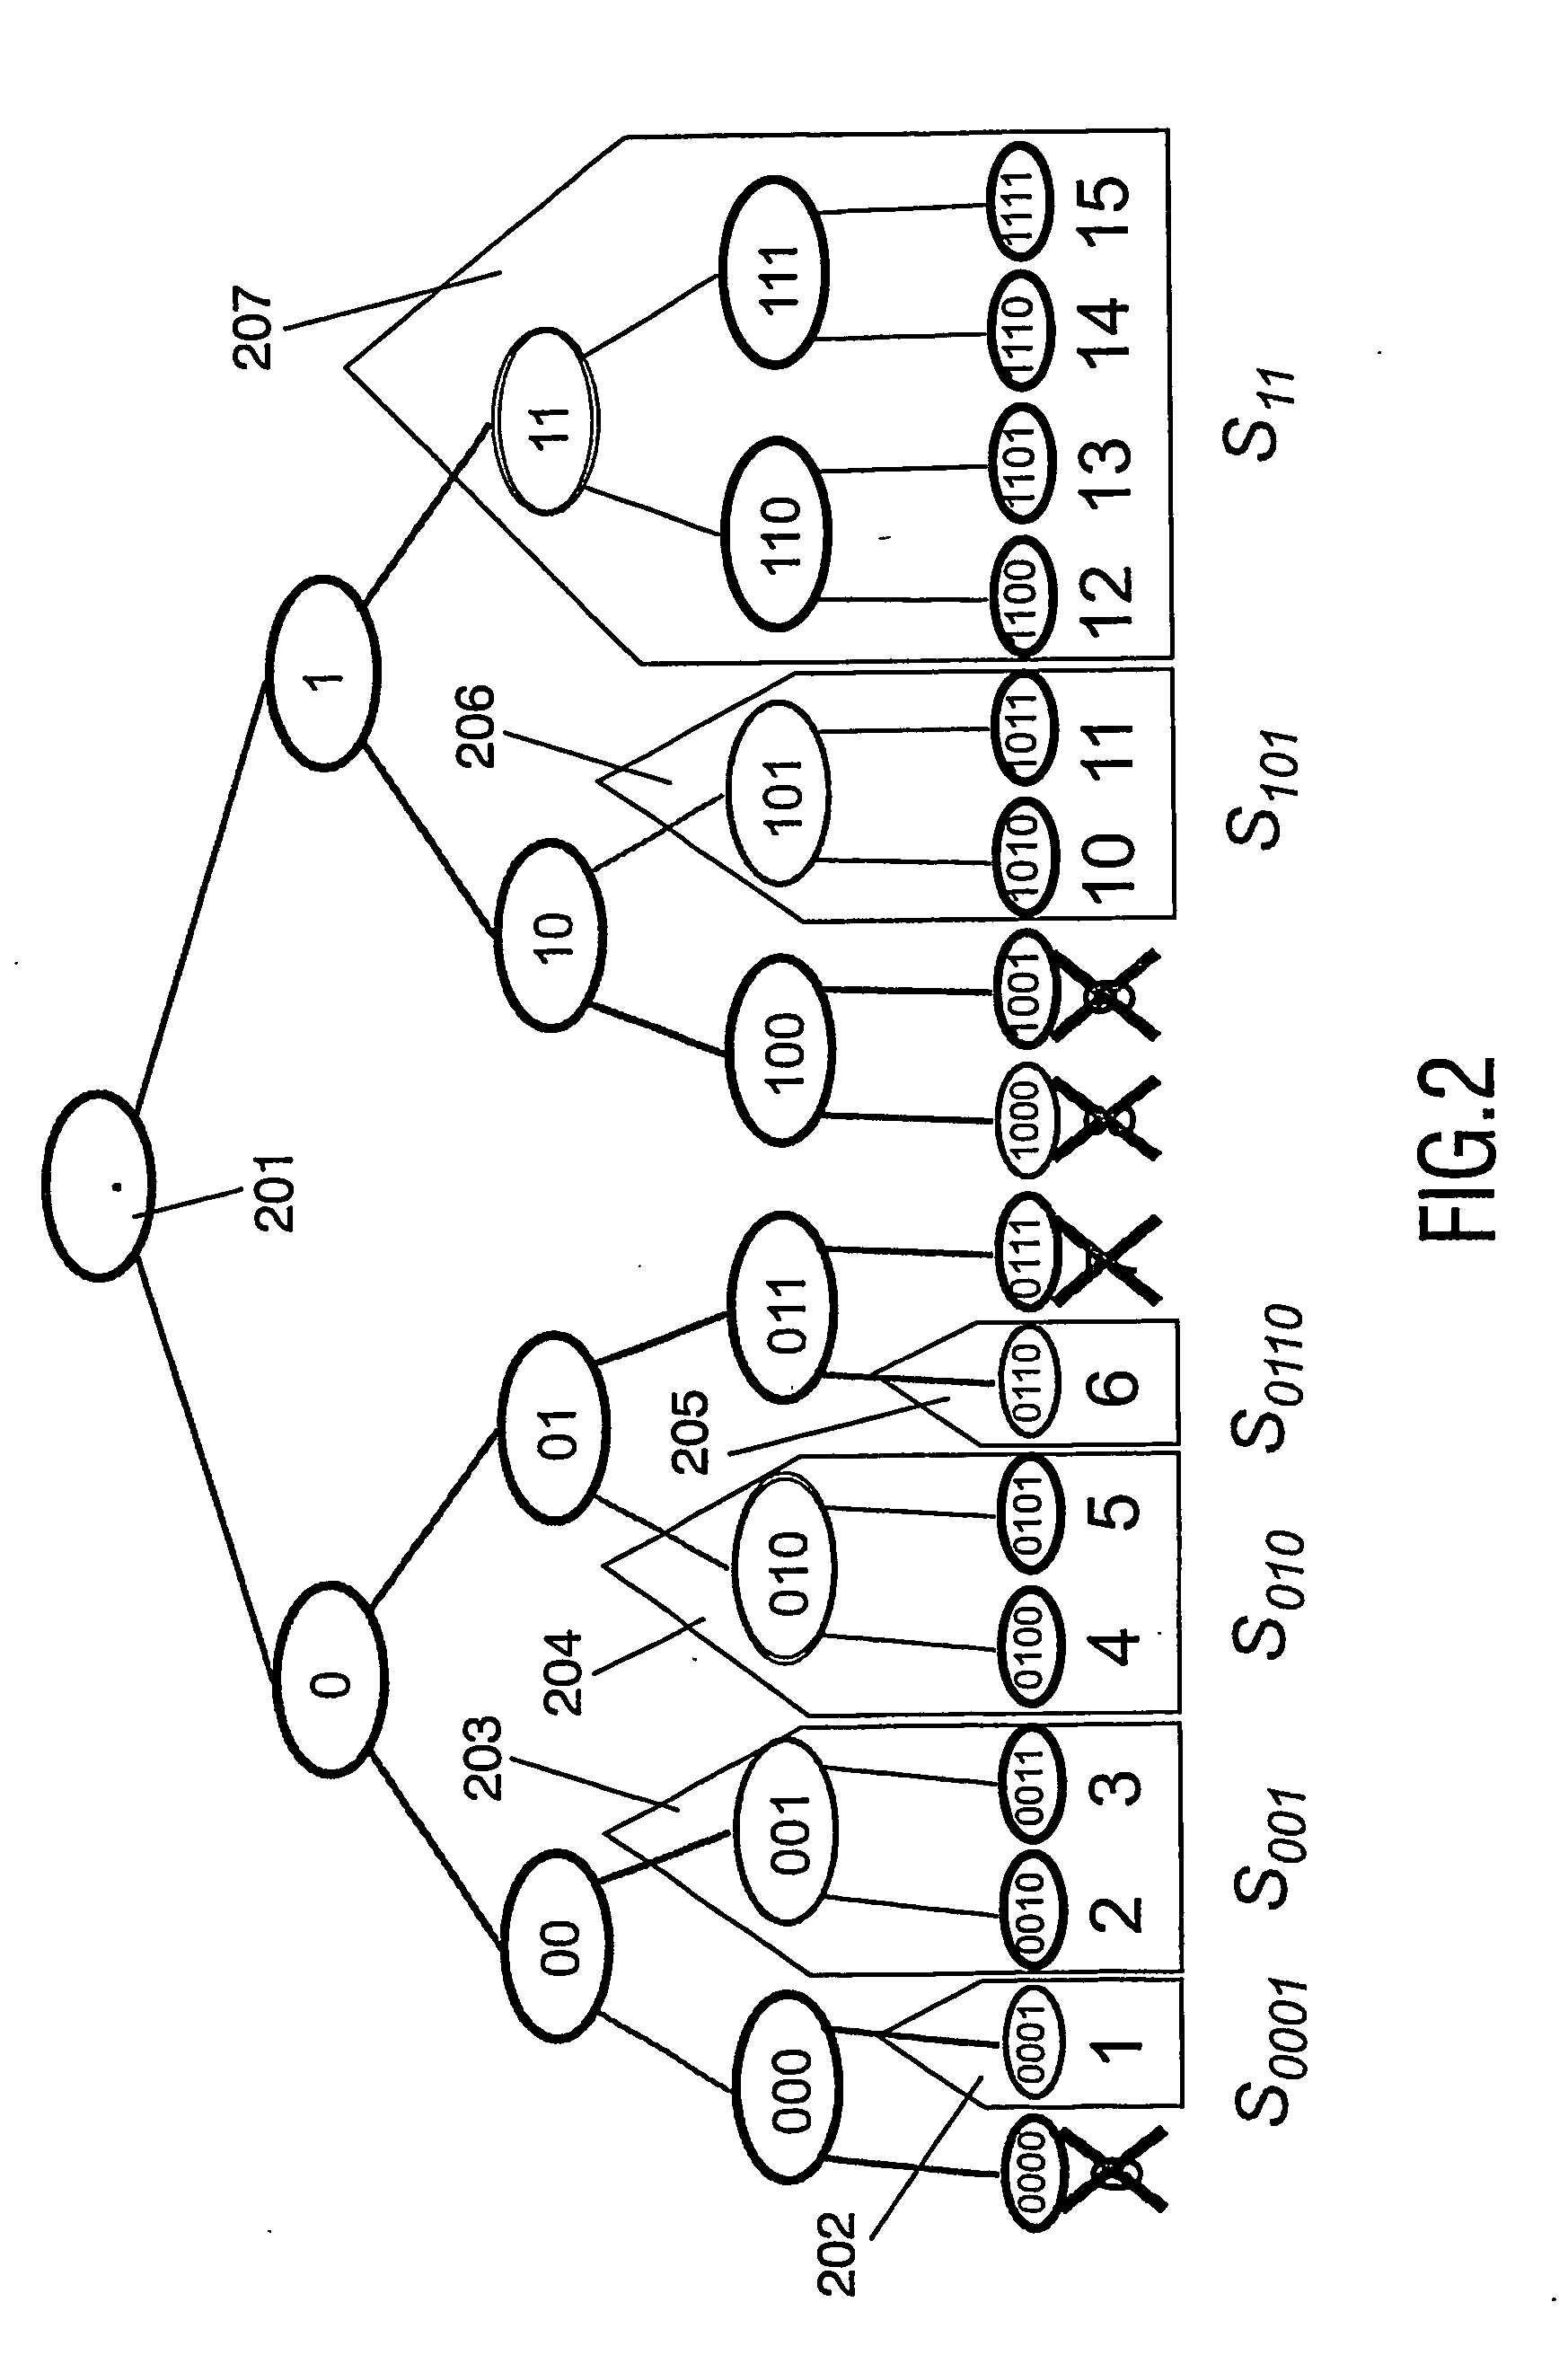 System for authentication between devices using group certificates